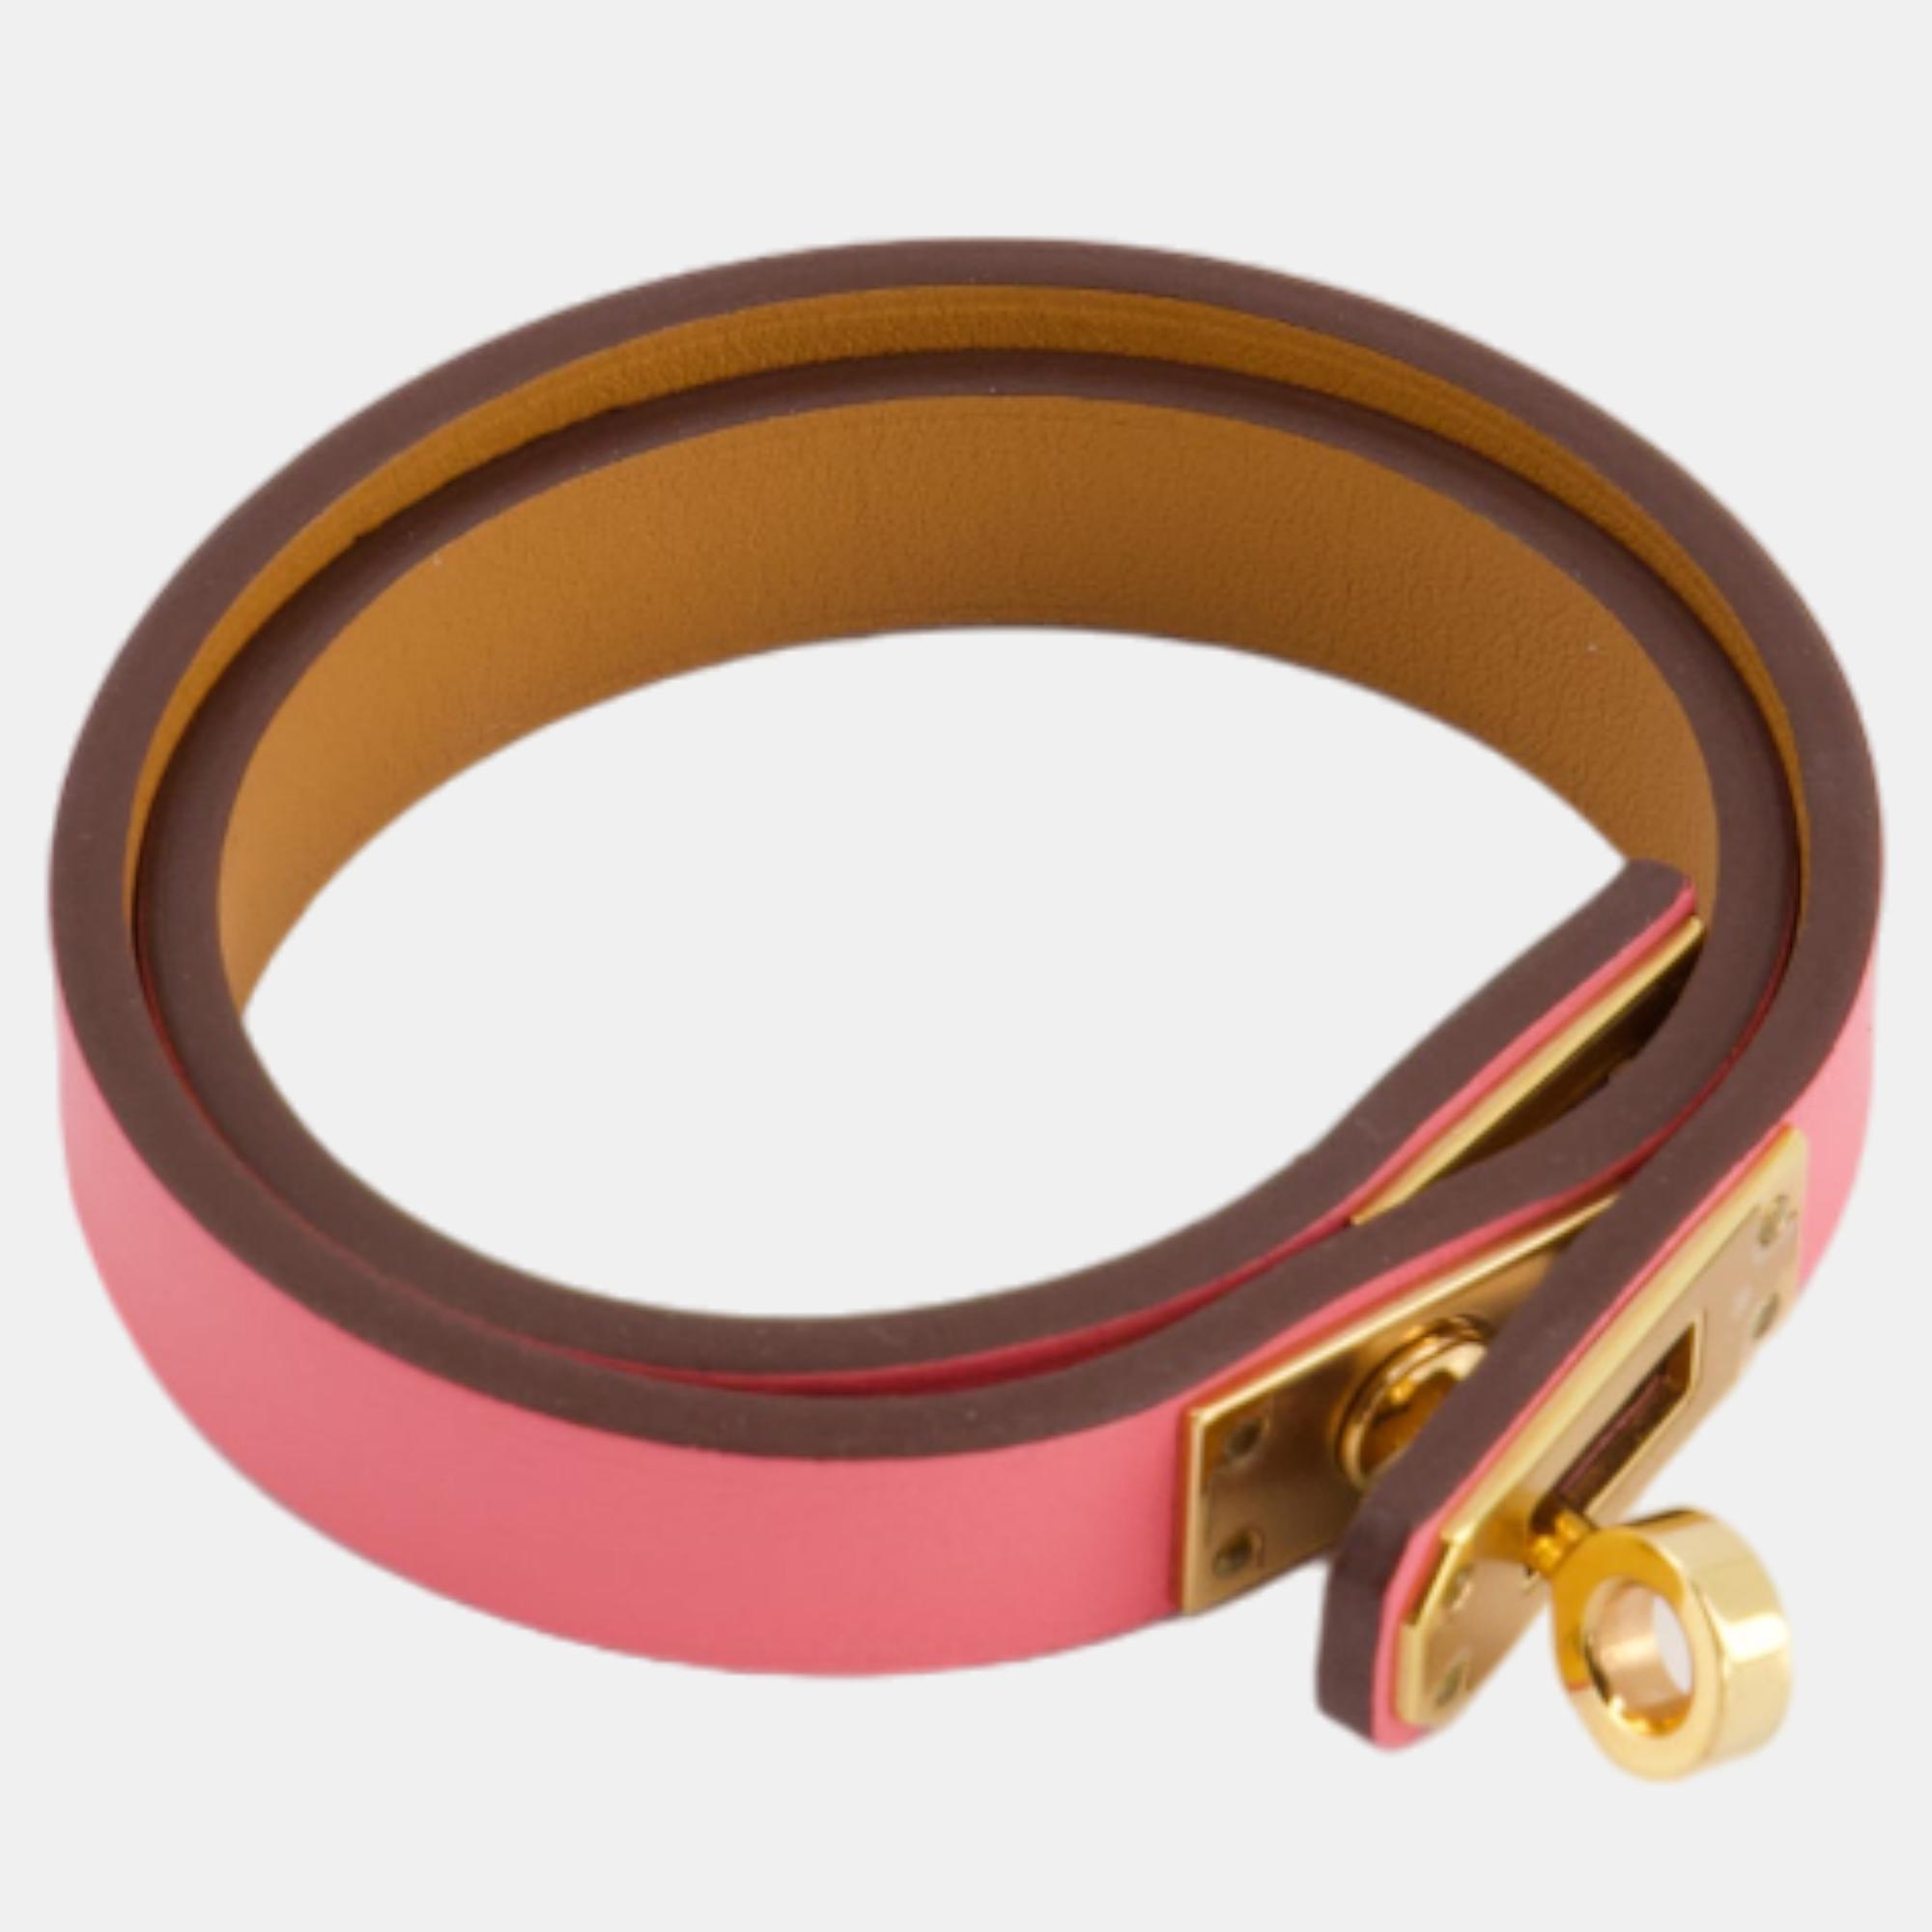 Hermes Mini Kelly Double Tour Bracelet In Rose Pop With Gold Hardware